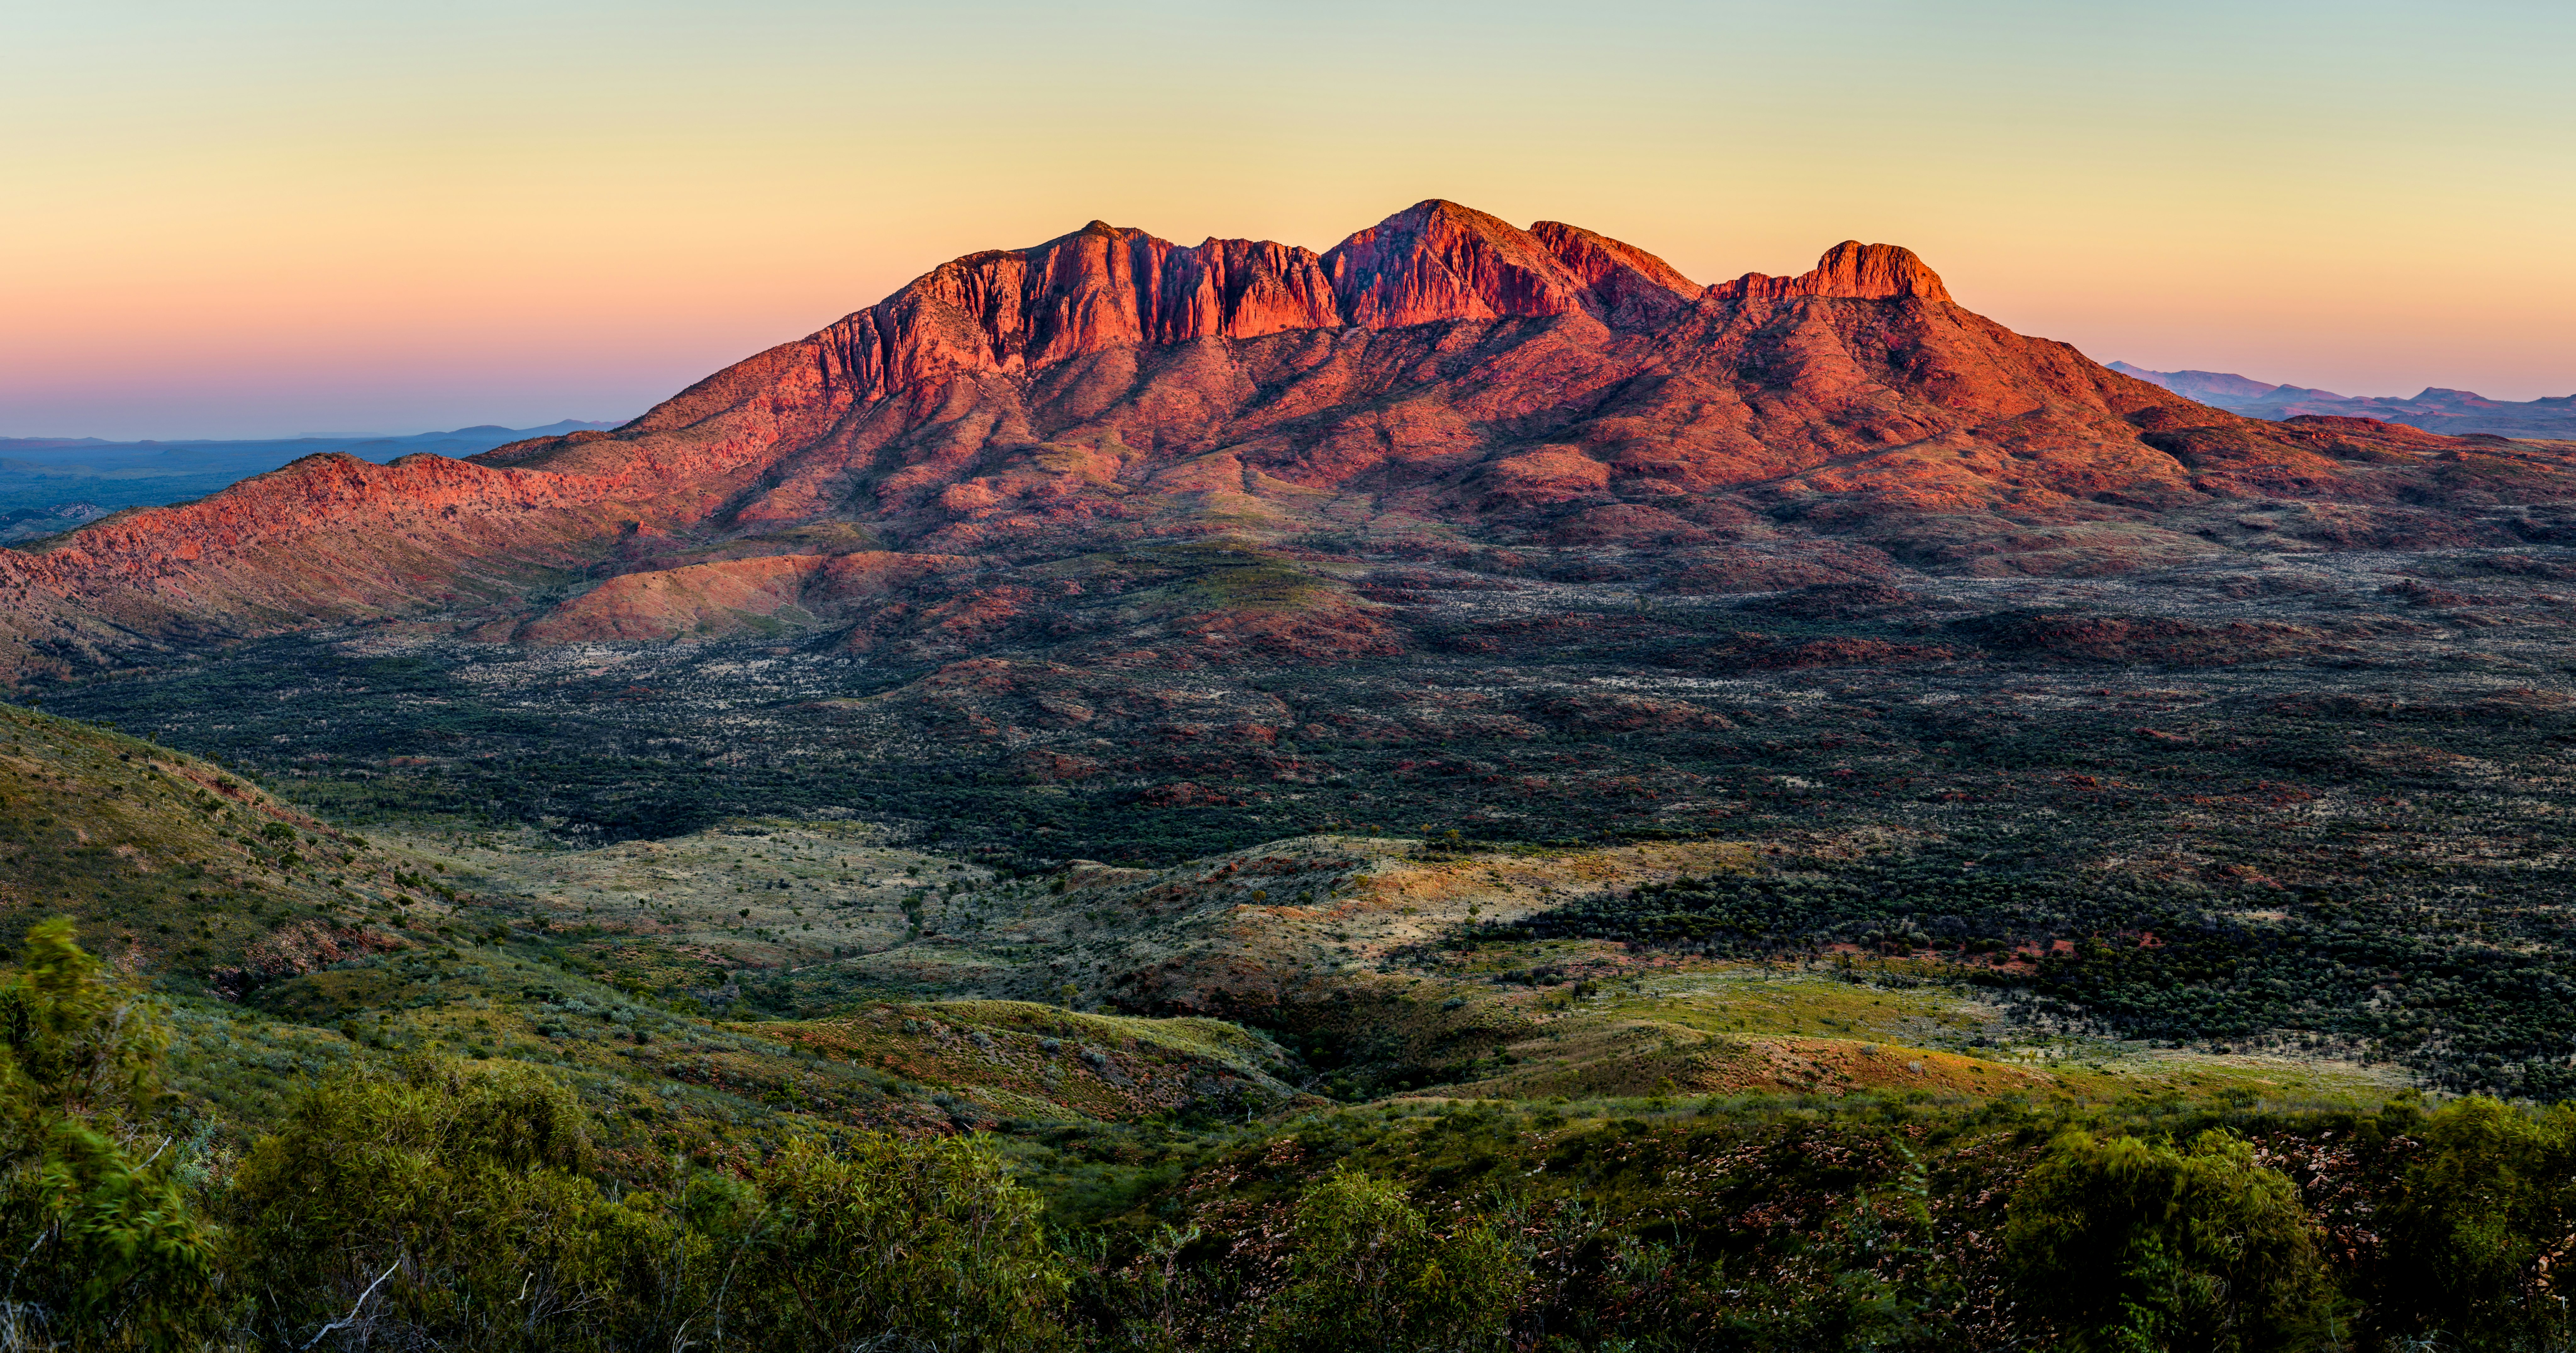 The deep red, orange, and purple alpenglow of Mt. Sonder in the West Macdonnel Range of Australia gleams at sunset over a variegated valley floor